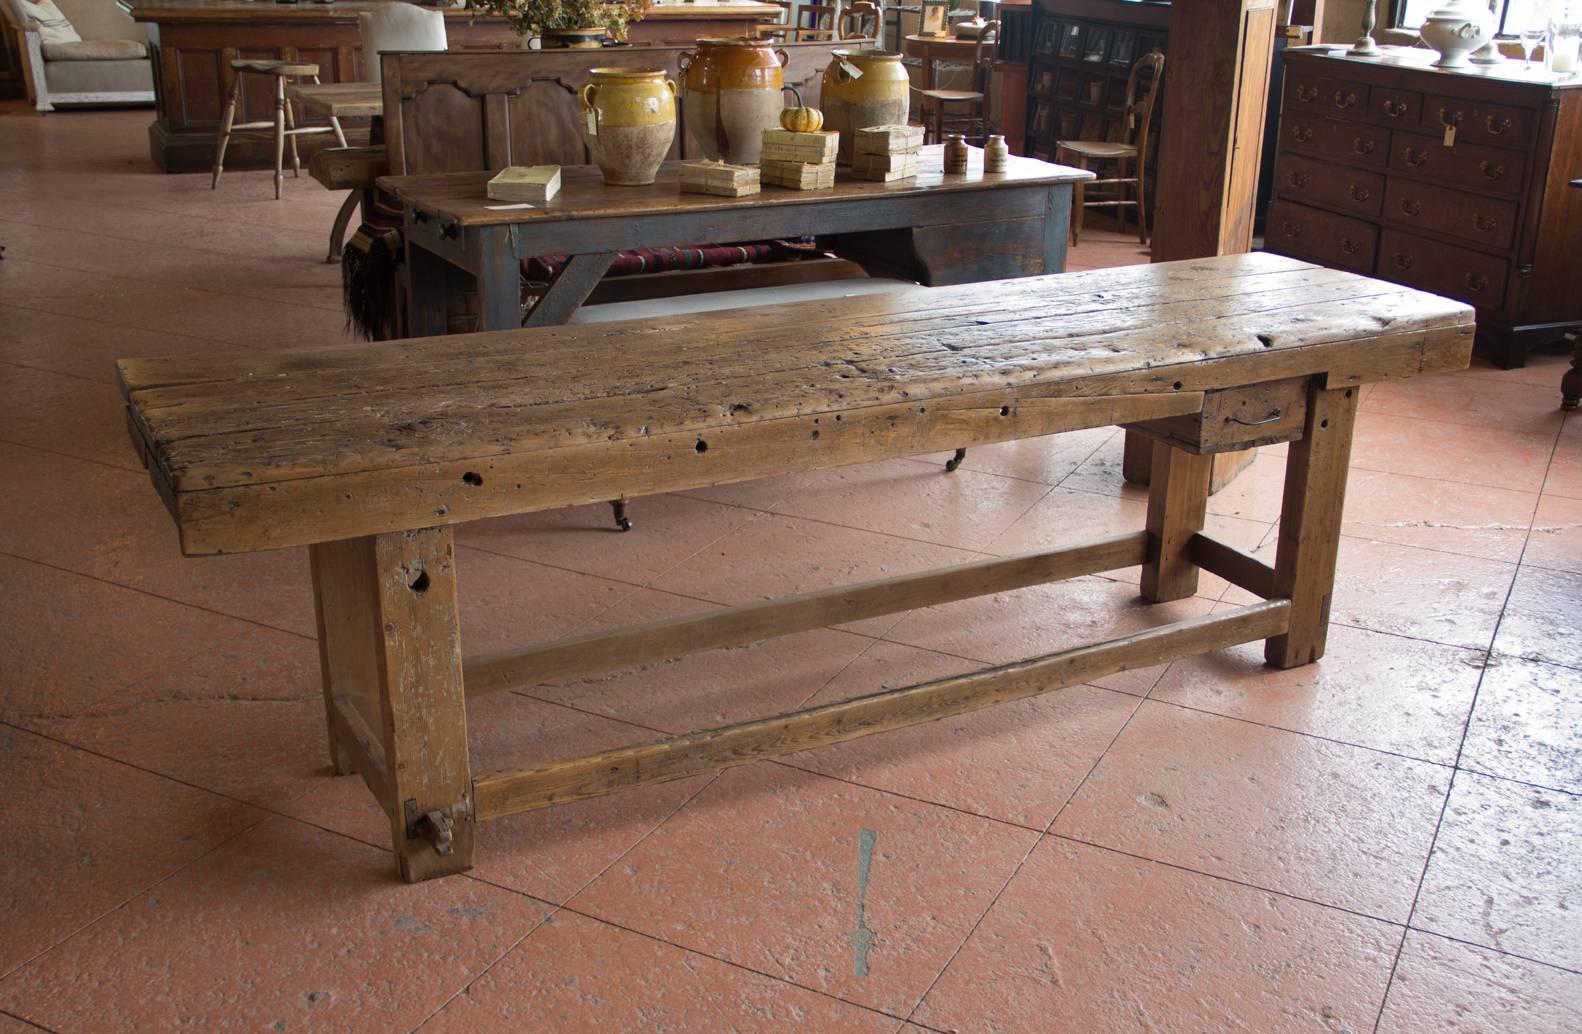 Super chunky antique American single drawer workbench with all the charm of a bench that was well used and cared for. Lovely top makes this a perfect kitchen piece.